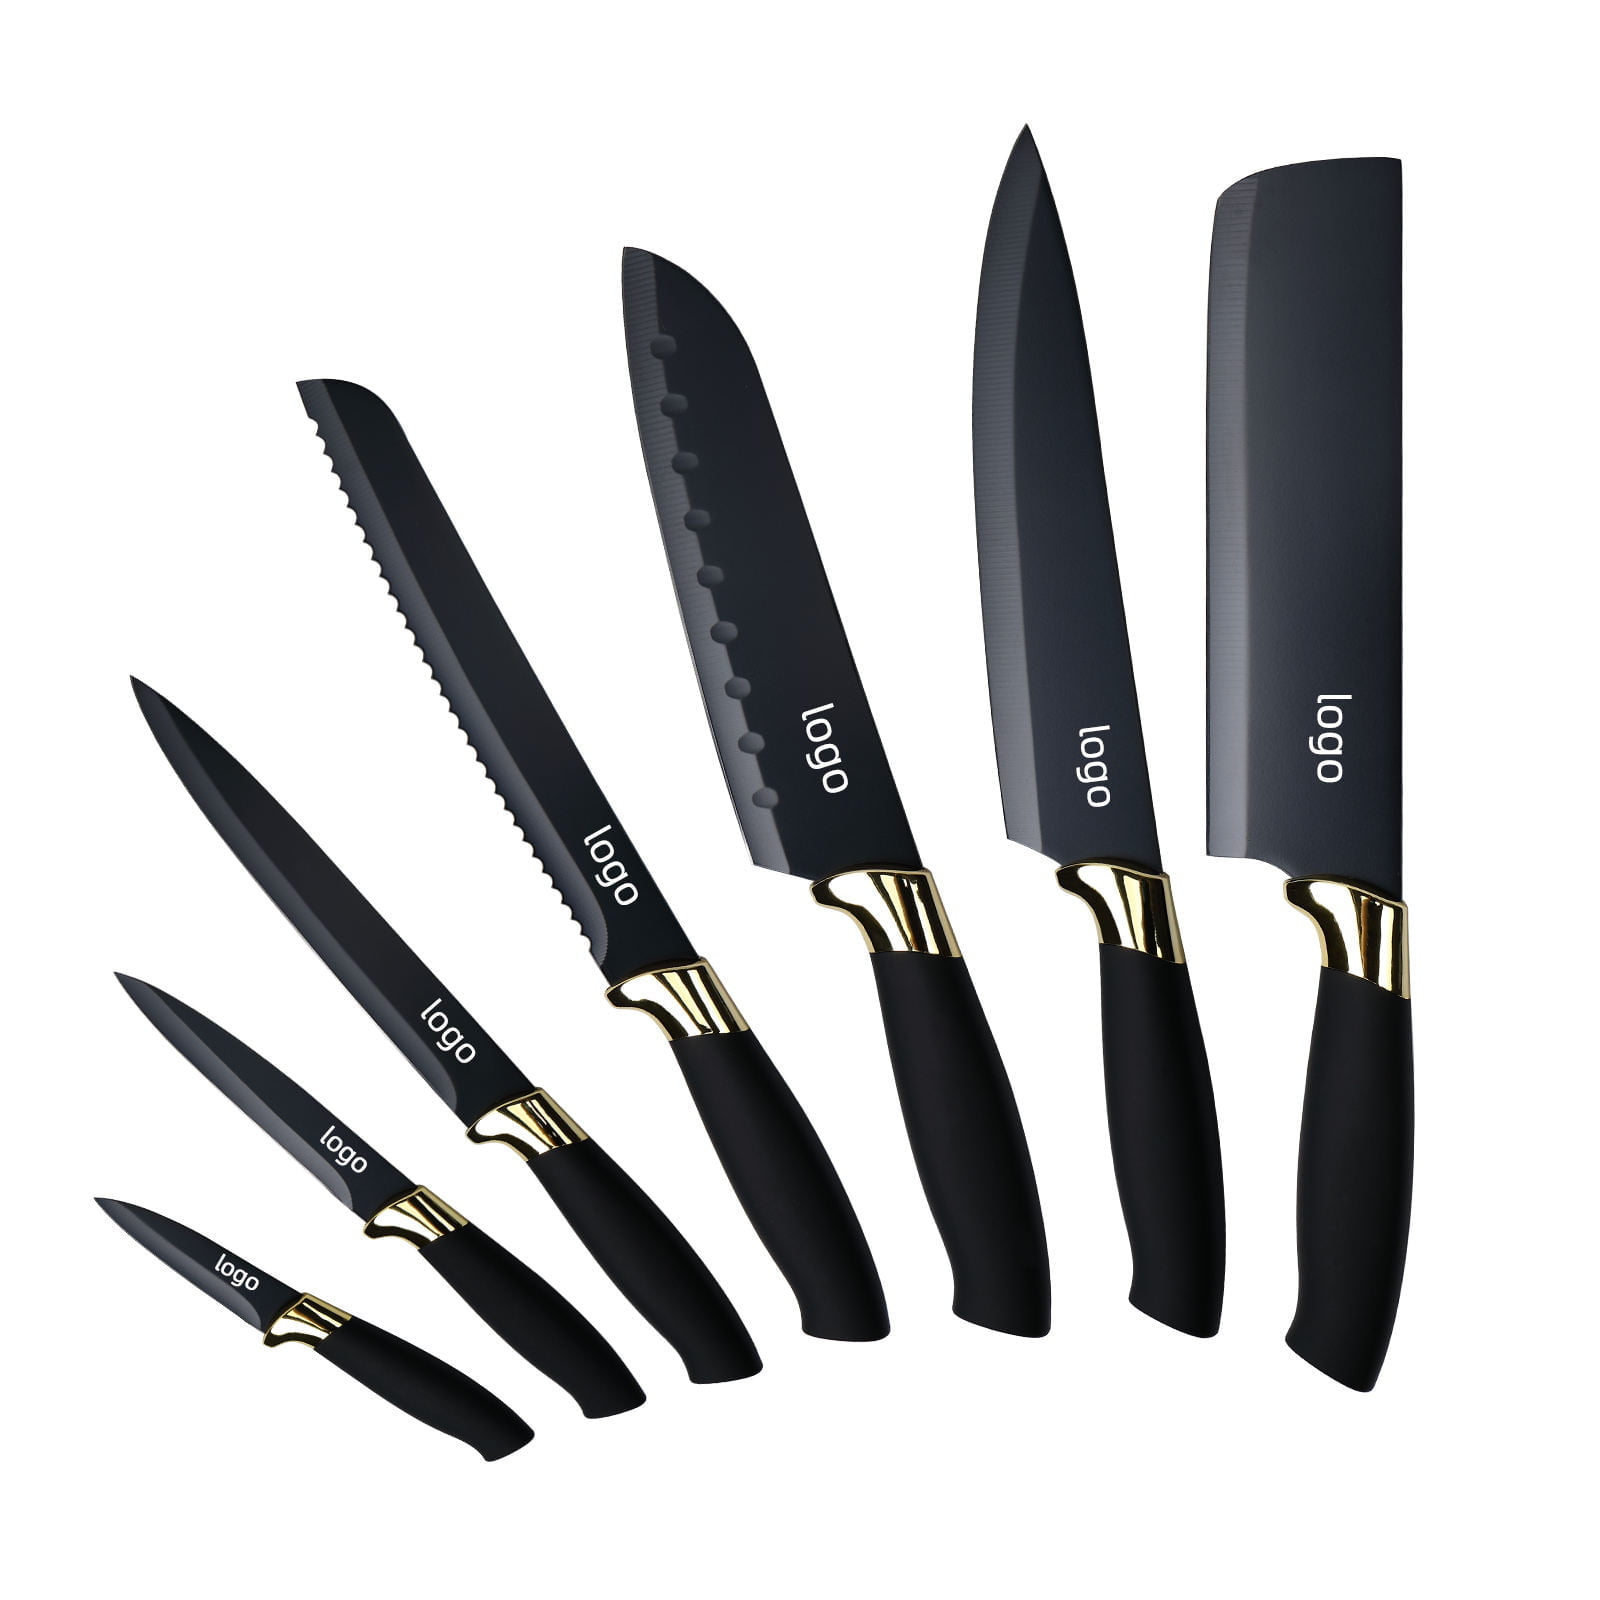 Kitchen Chefs Knife in Black with Acrylic Block